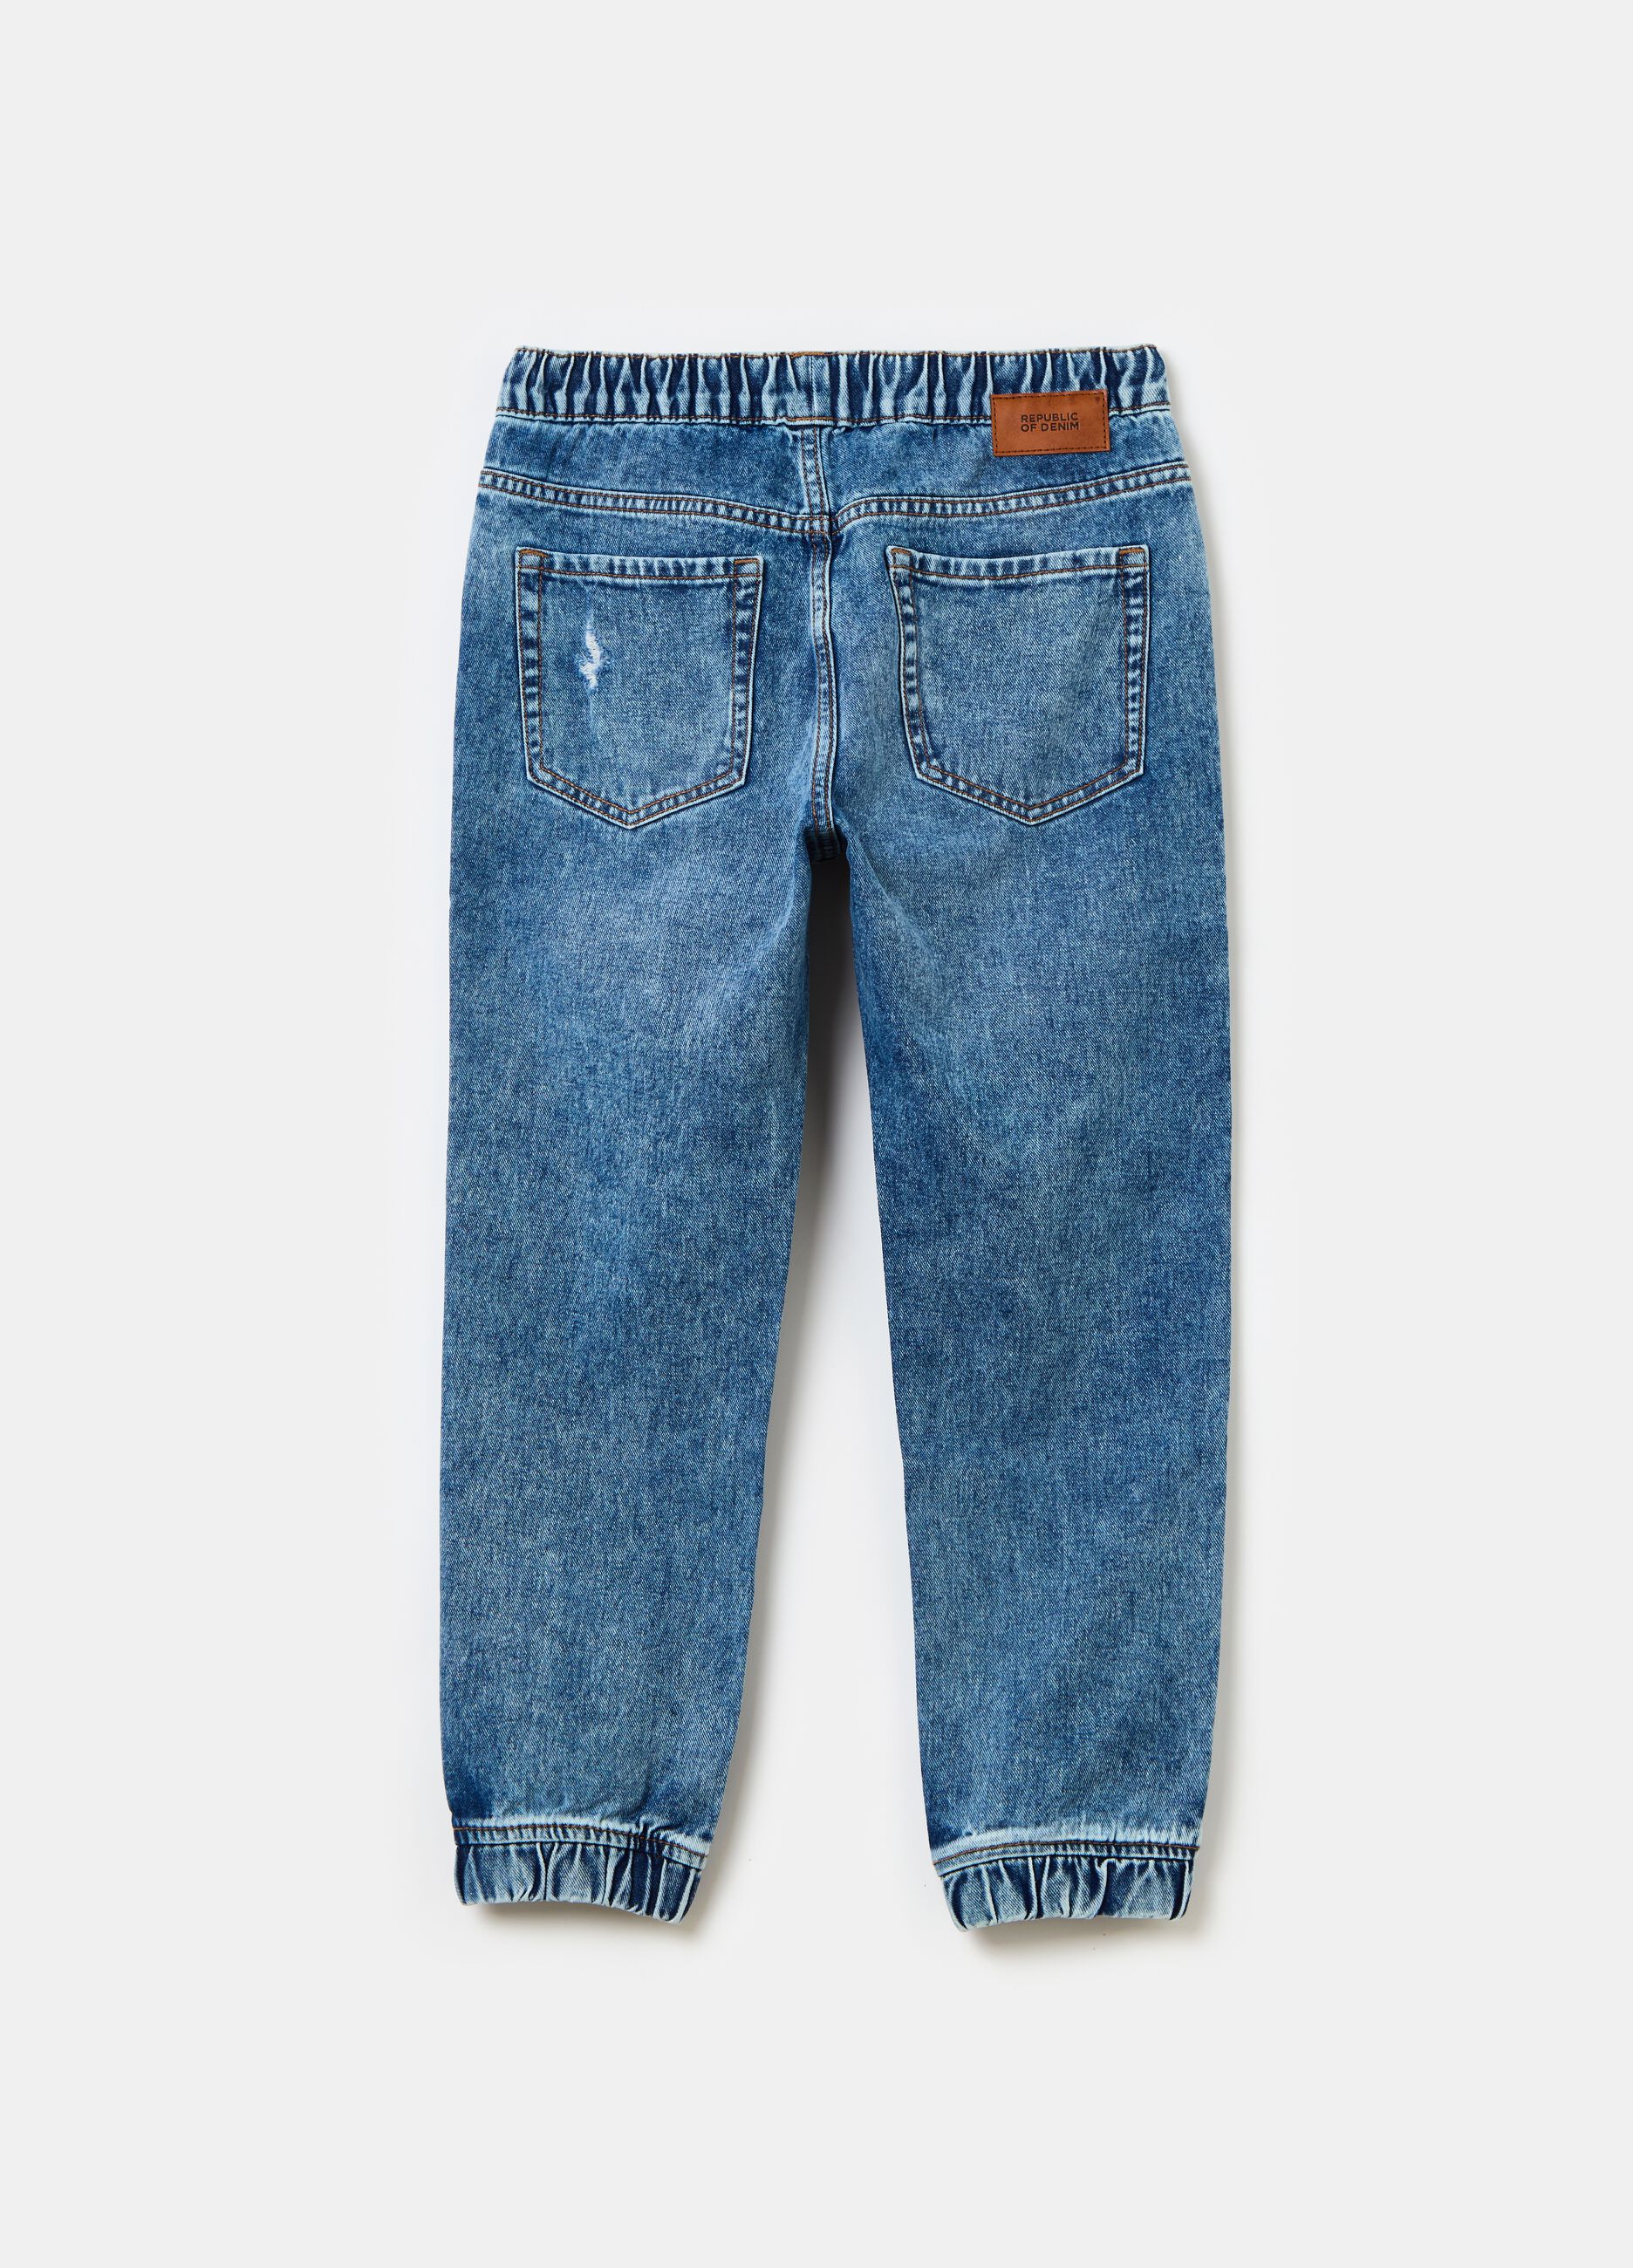 Acid wash denim joggers with abrasions